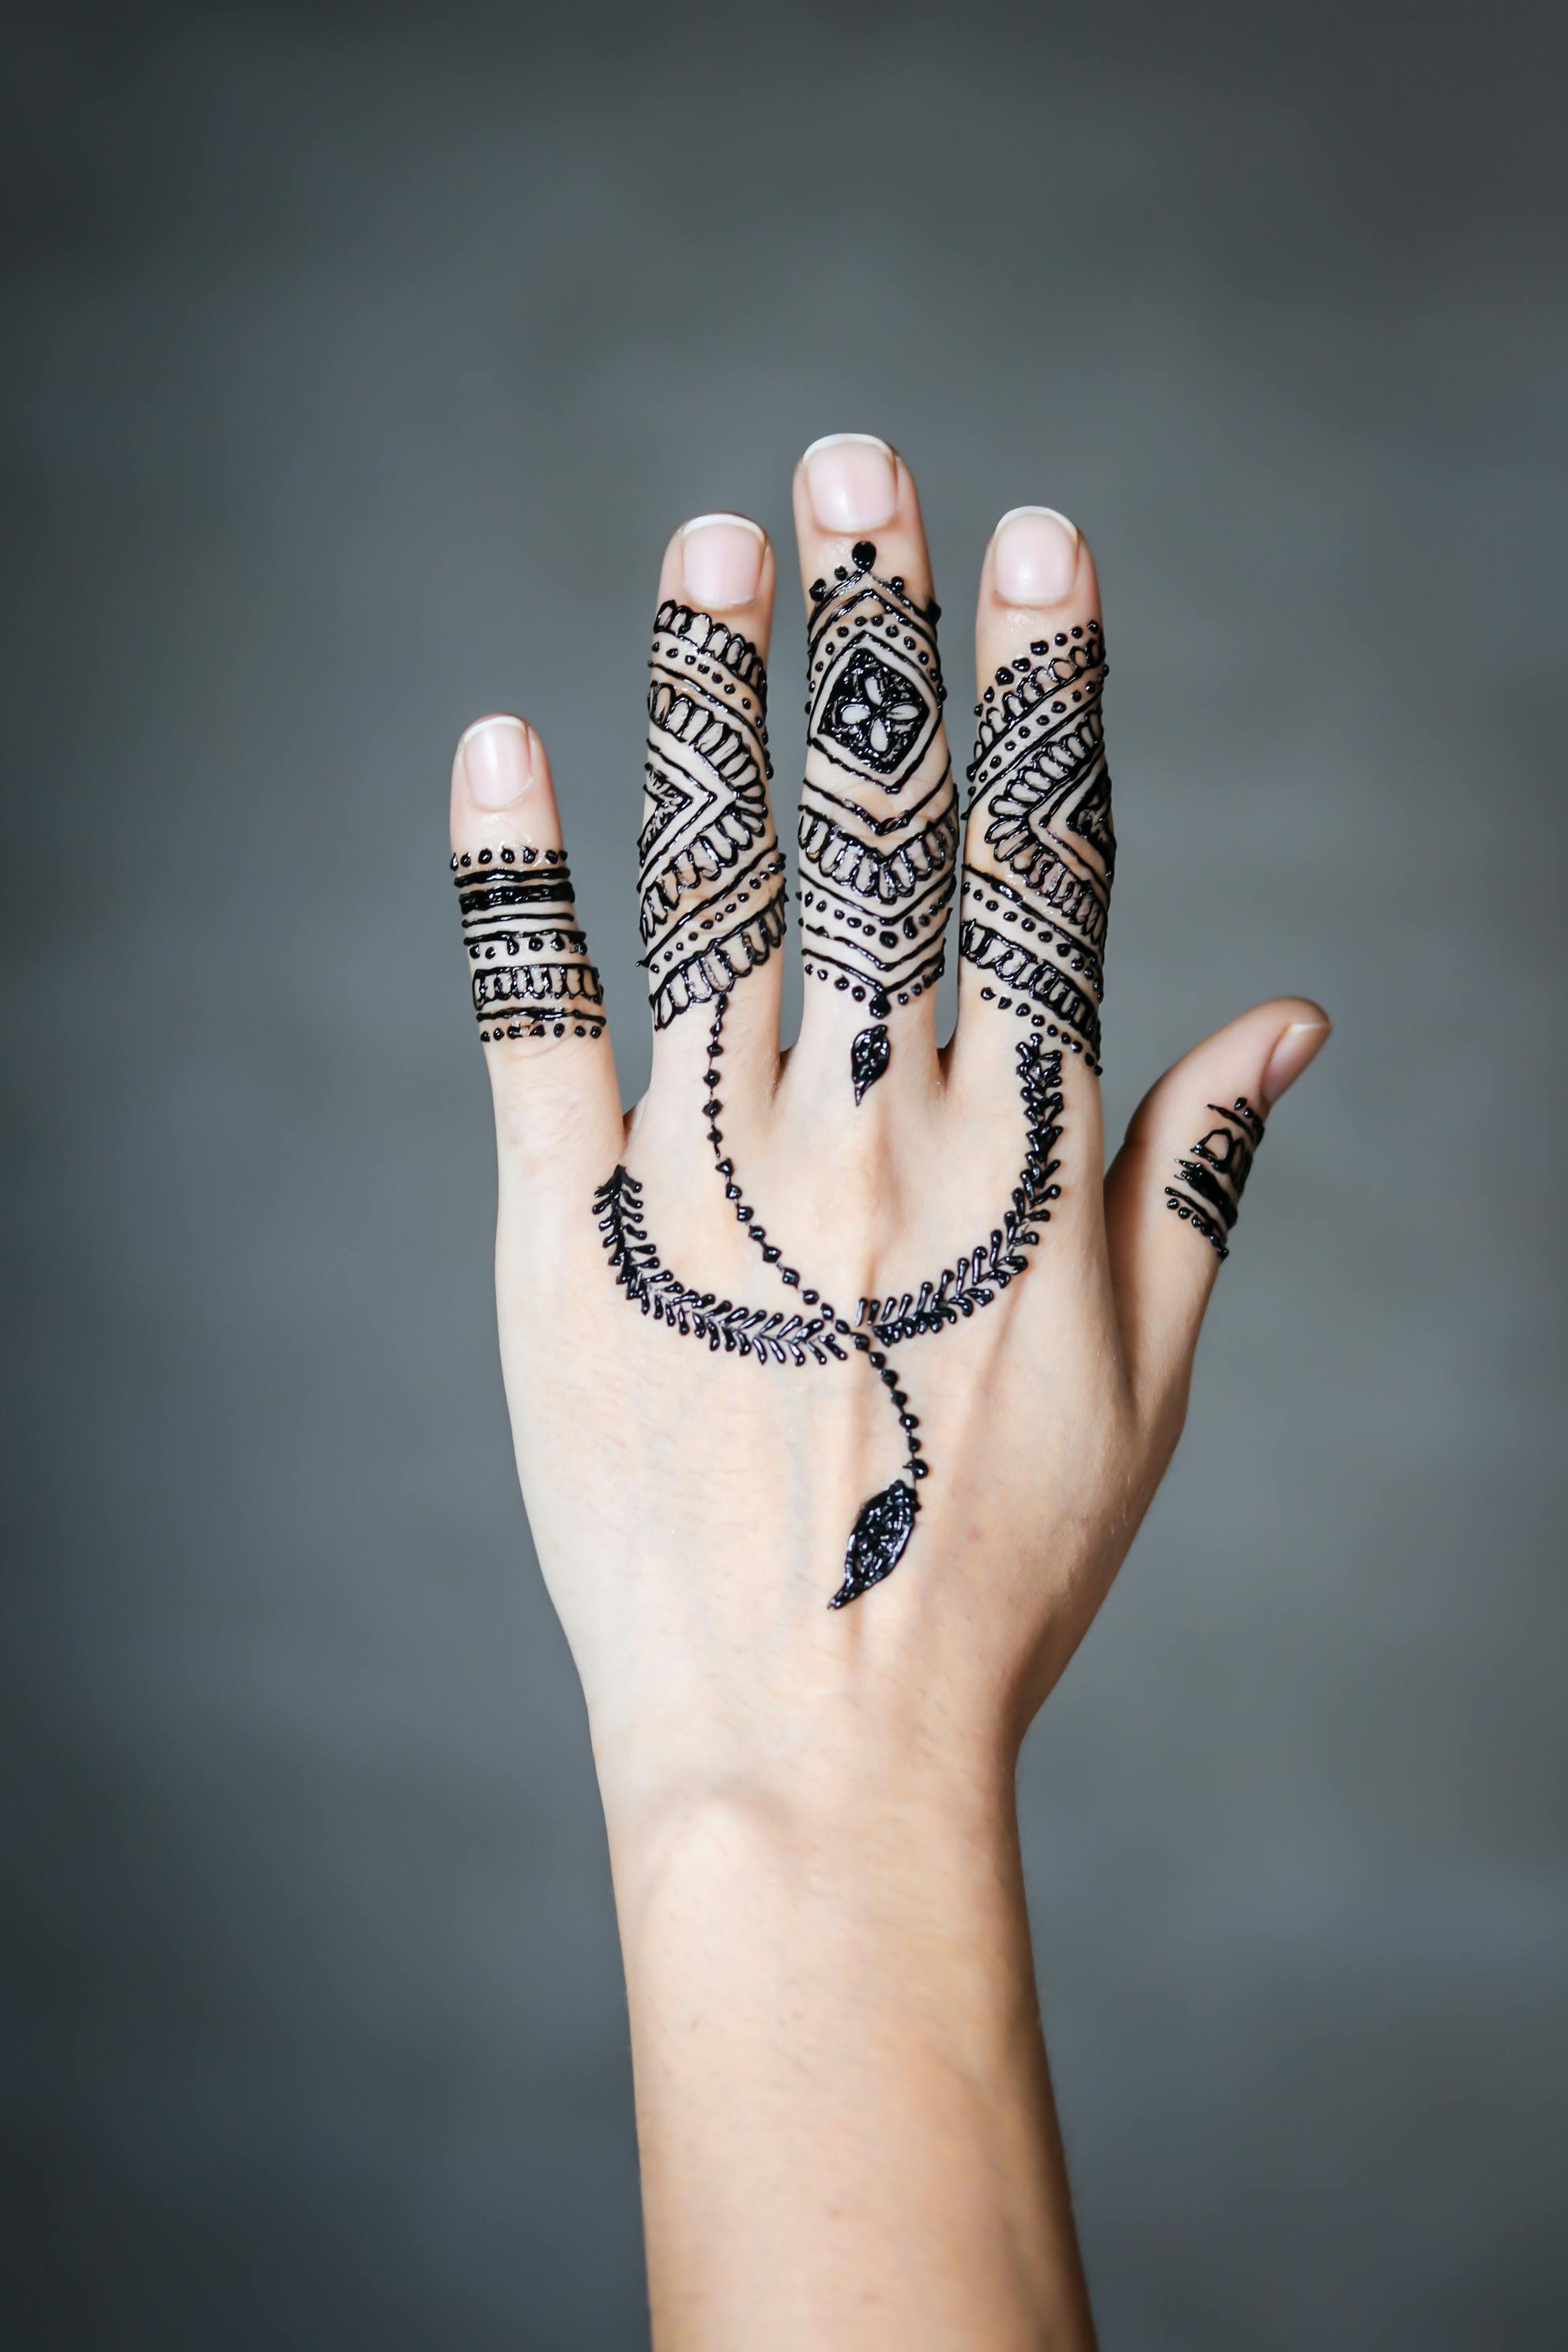 Tattoos and Henna designs in the Arab world - ARABIC ONLINE